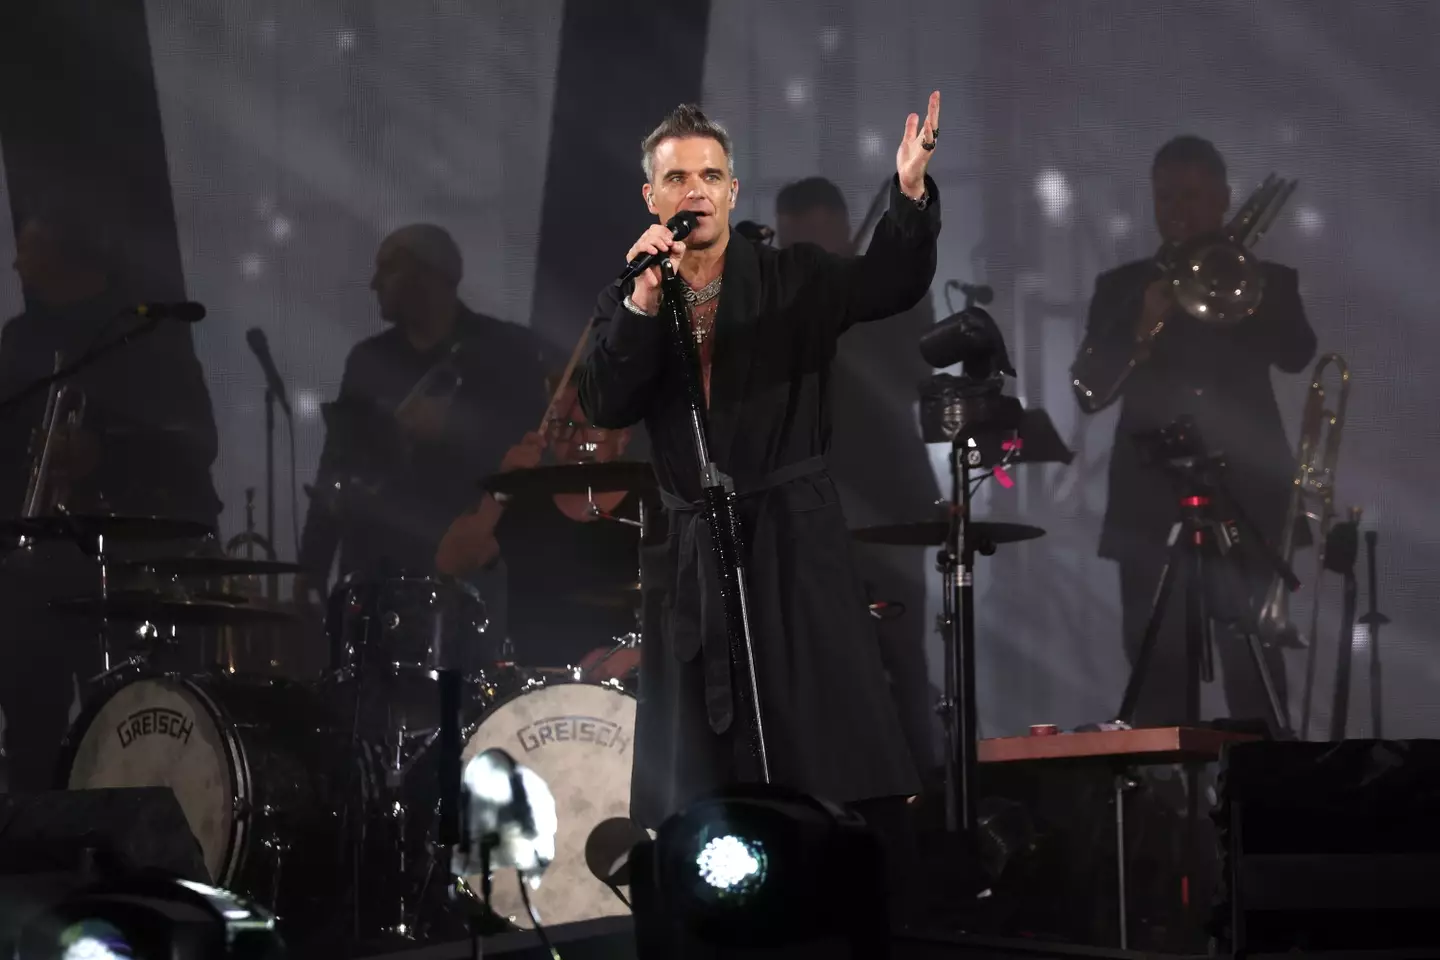 An elderly was rushed to hospital in critical condition following the Robbie Williams concert.